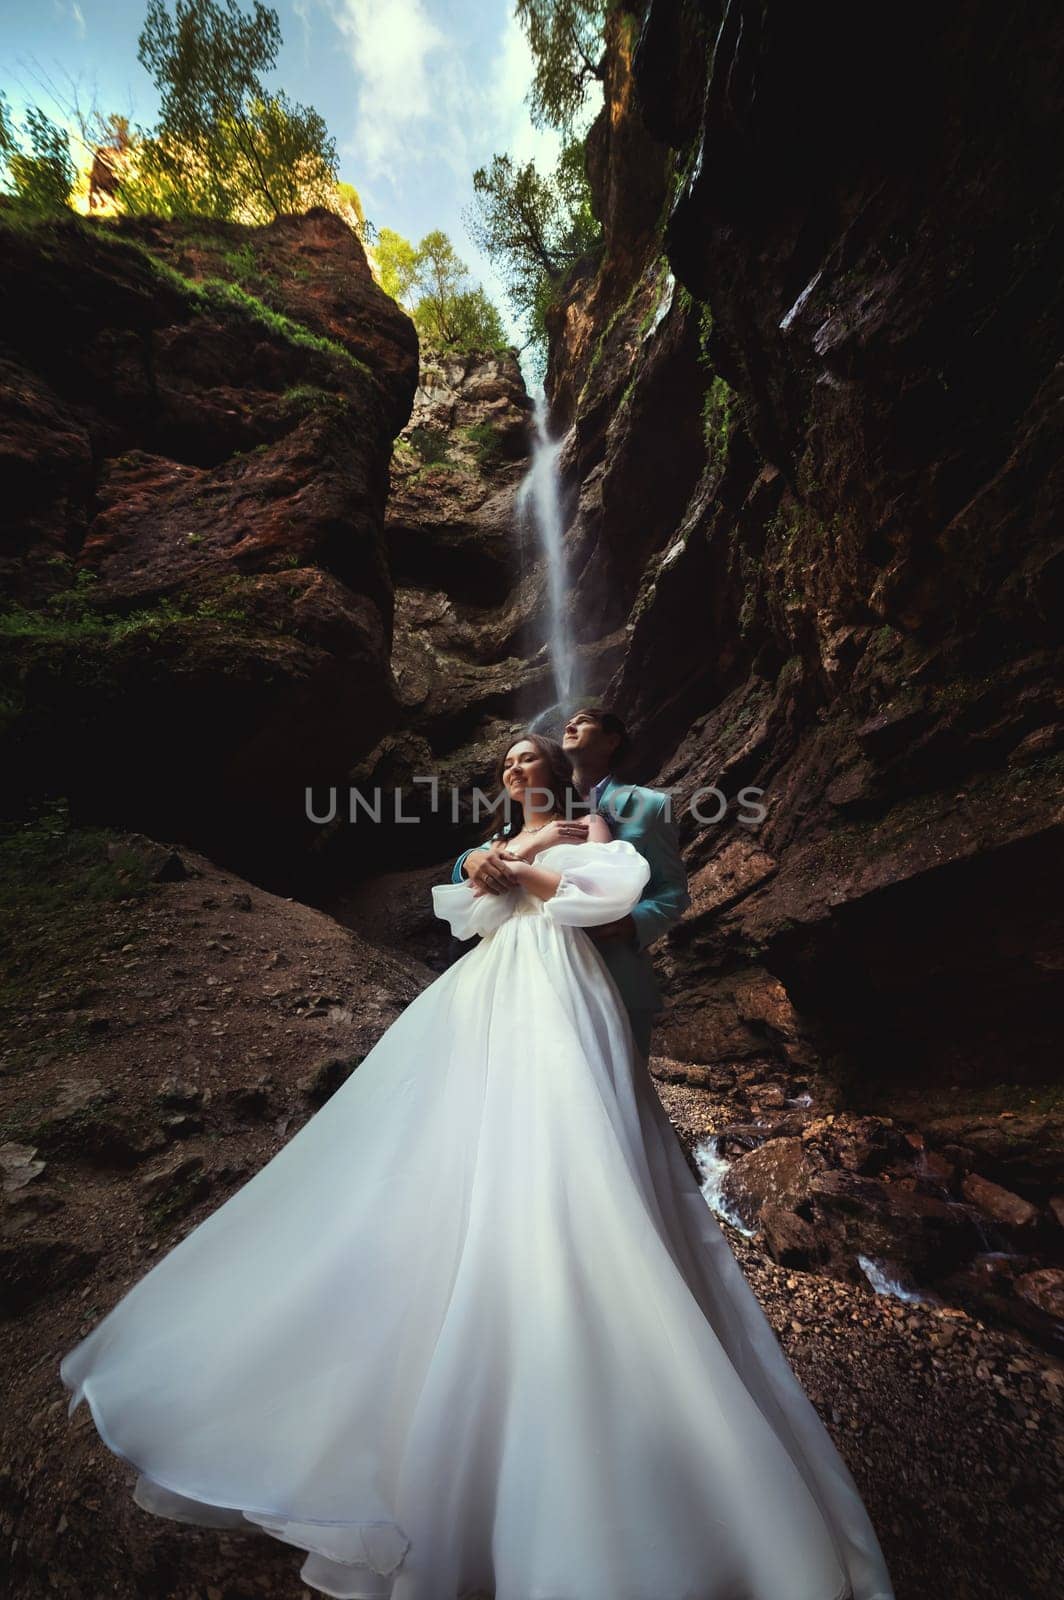 Couple in love against the backdrop of a waterfall. Honeymoon trip. Happy couple in the mountains. Vertical photo of newlyweds hugging against the backdrop of a waterfall in the gorge by yanik88